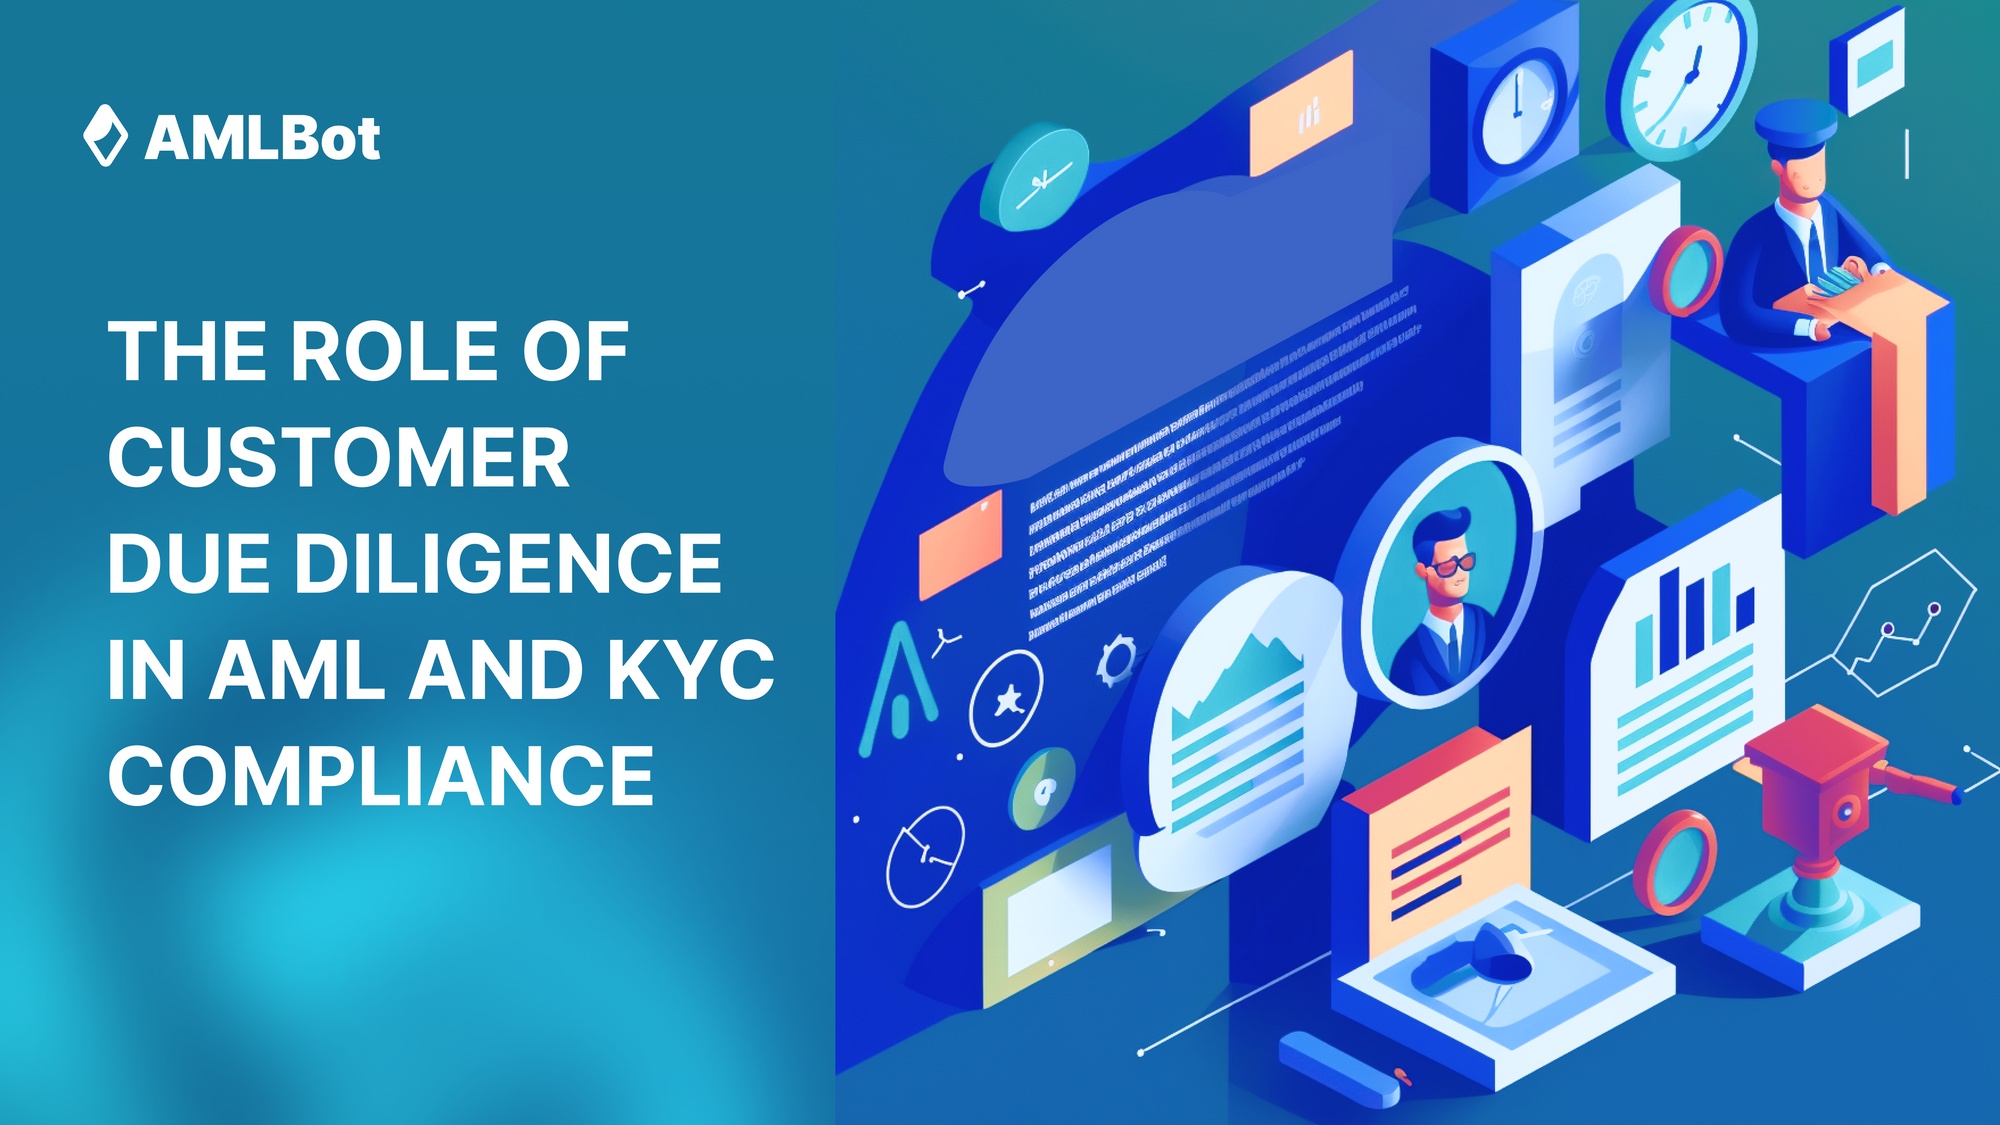 The Role of Customer Due Diligence in AML and KYC Compliance